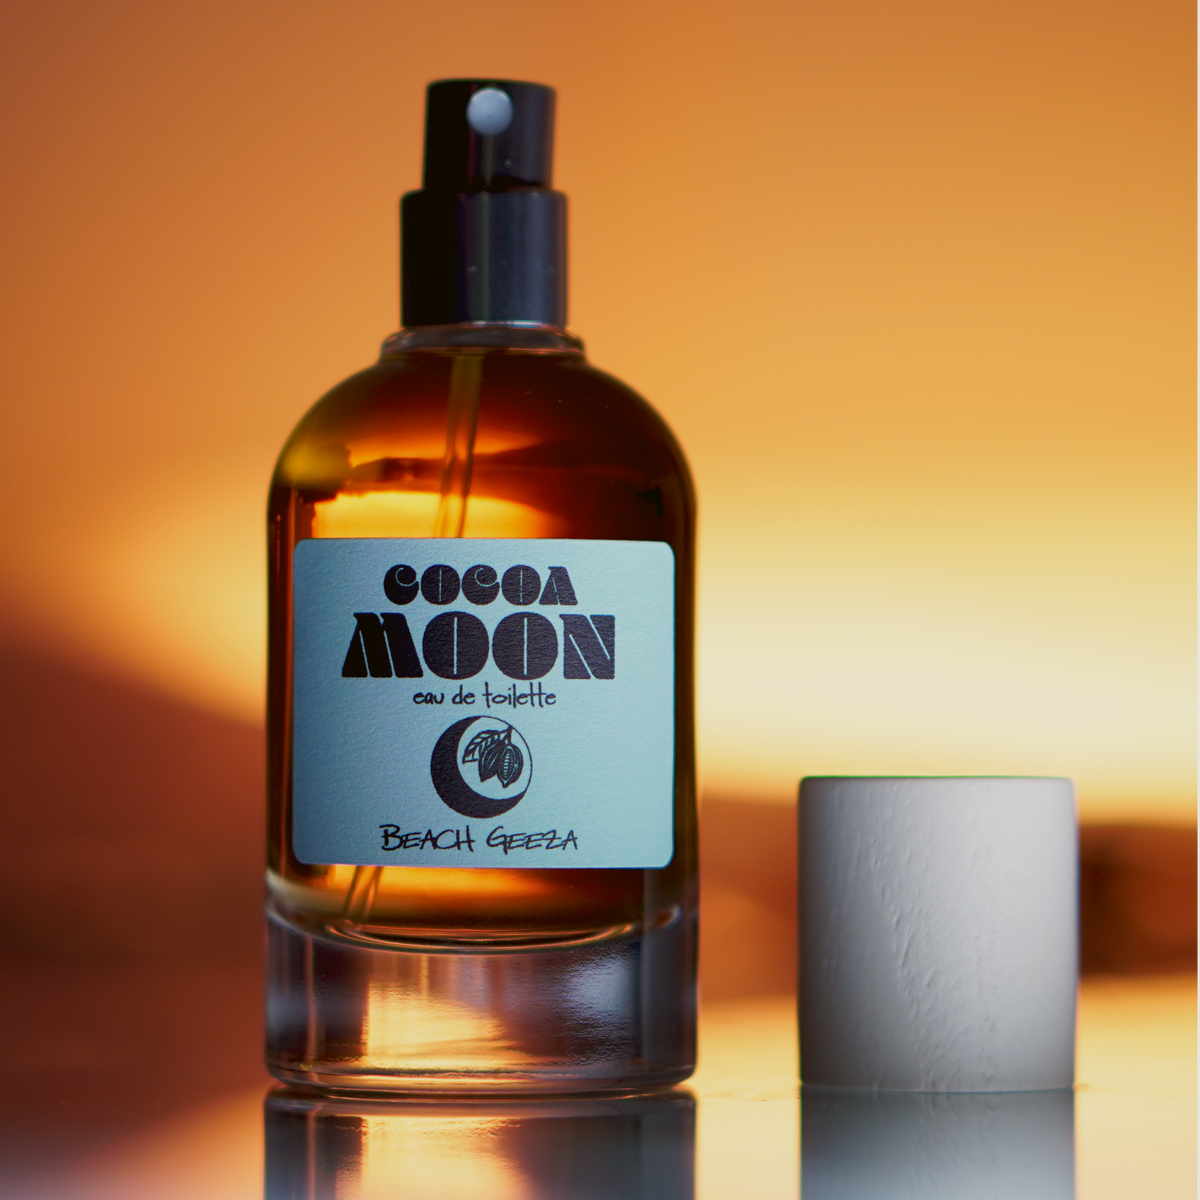 Cocoa Moon EDT (Chocolate) - Annual Fall Release